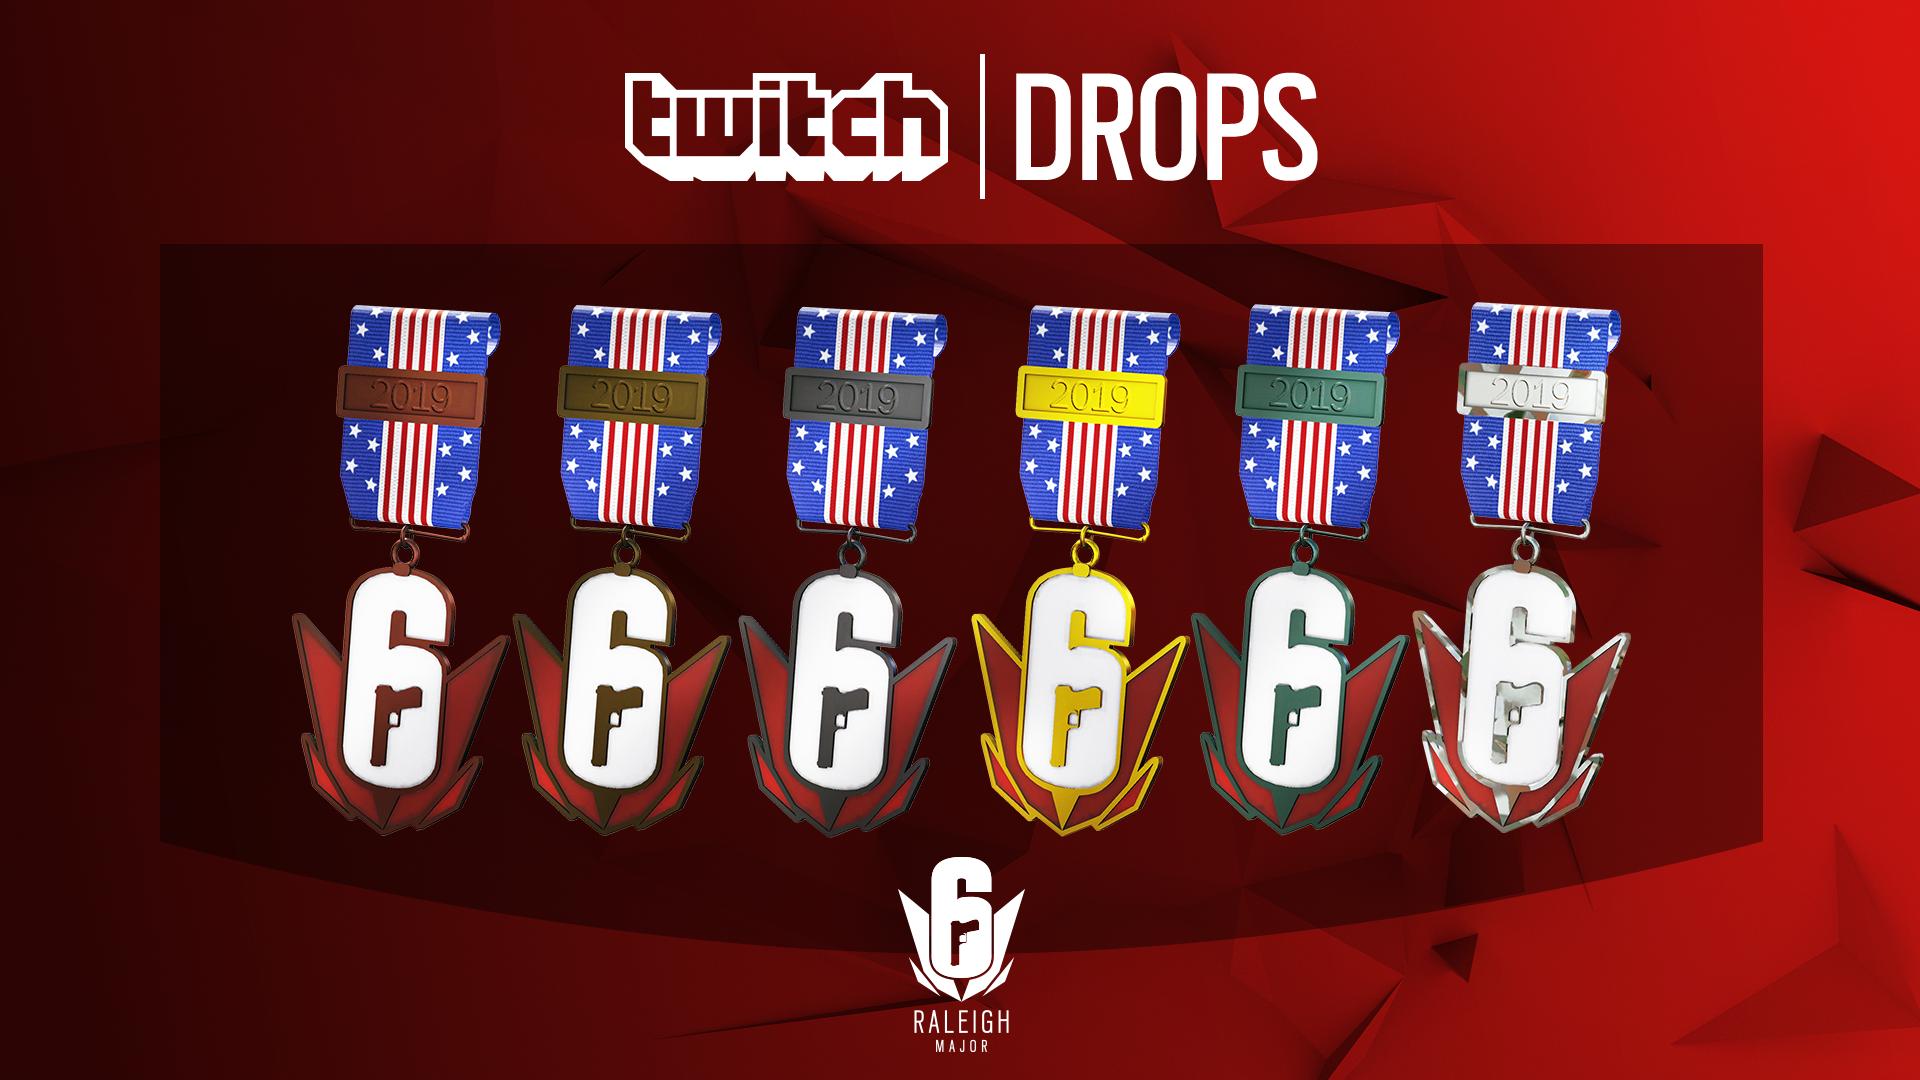 Rainbow 6 Siege UK on X: Twitch Drops are available throughout the whole  duration of Stage 1! ✓ 16 items originally included in Esports Packs ✓ 16  new items - legacy #R6PL